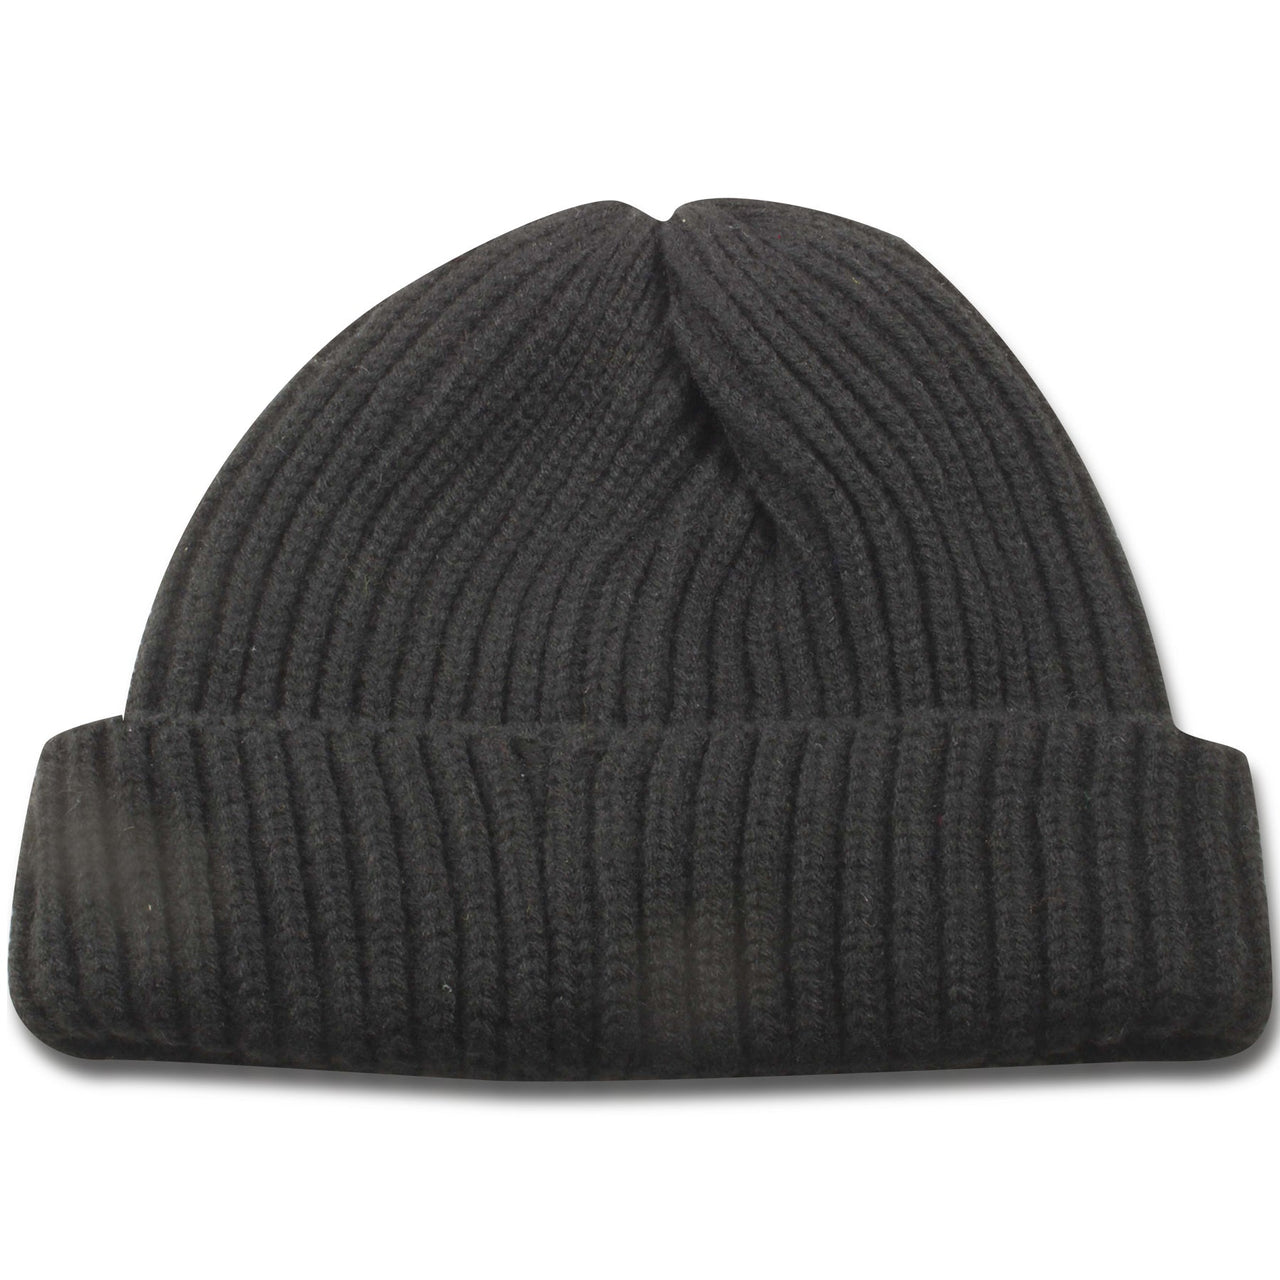 Black Cable Knit Winter Beanie